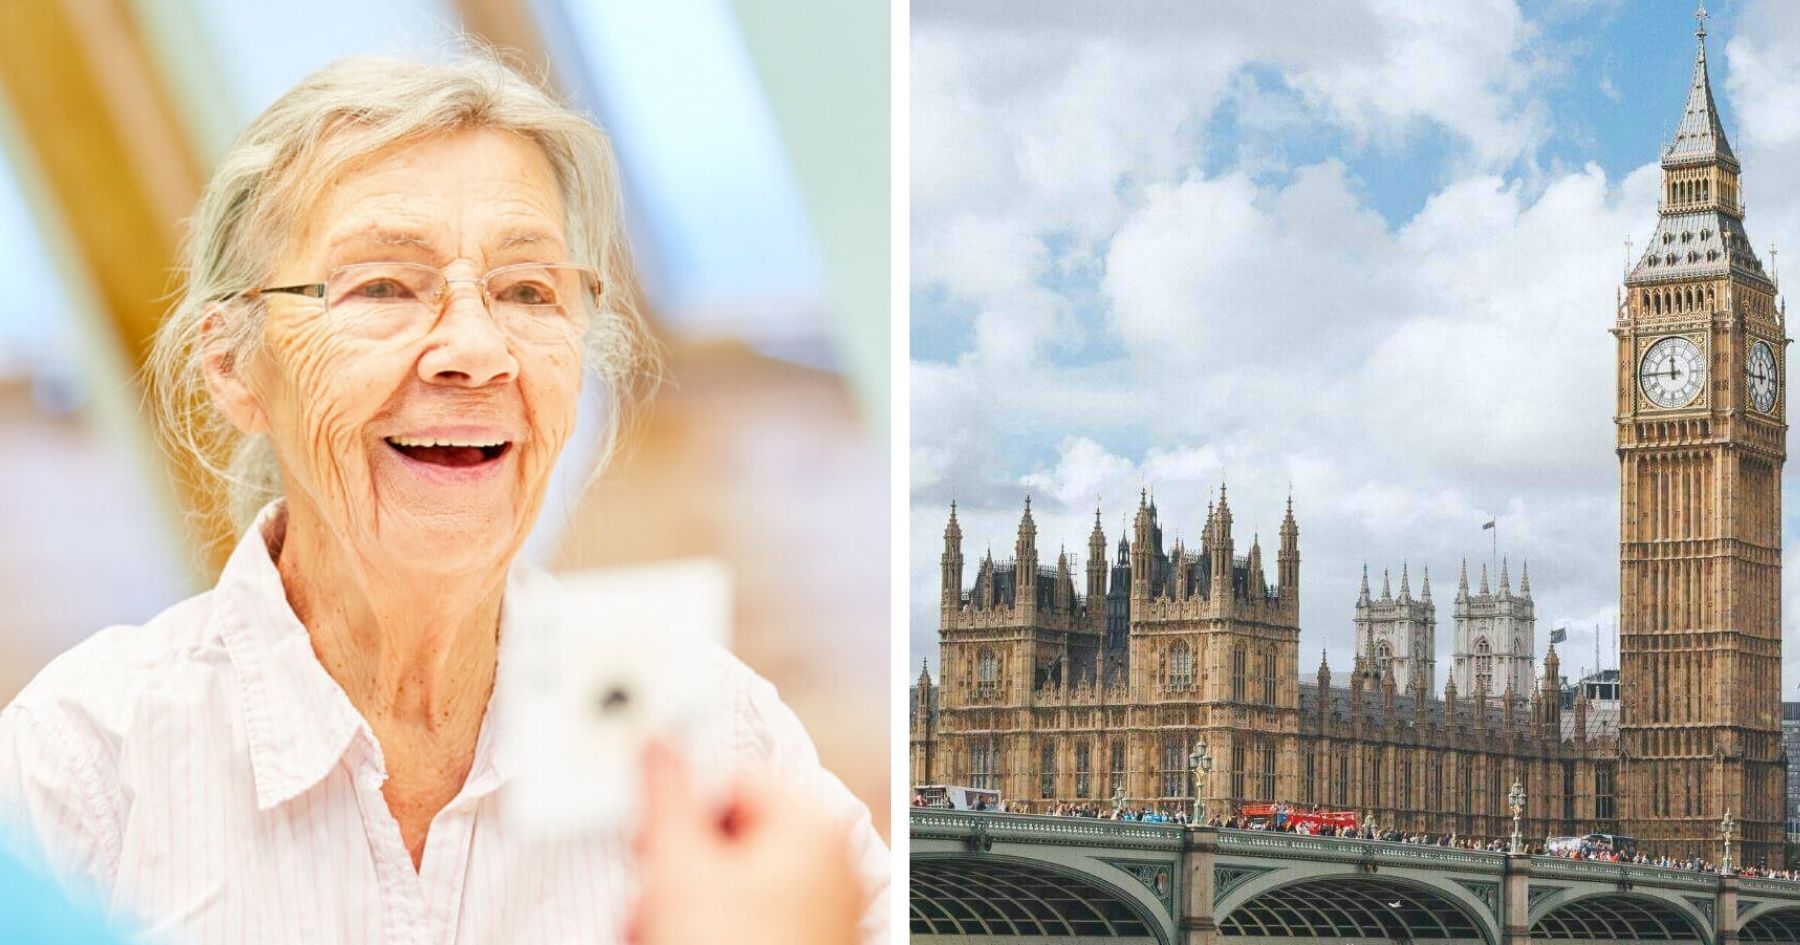 70 MPs and Peers call on Govt to reject attempts to introduce assisted suicide